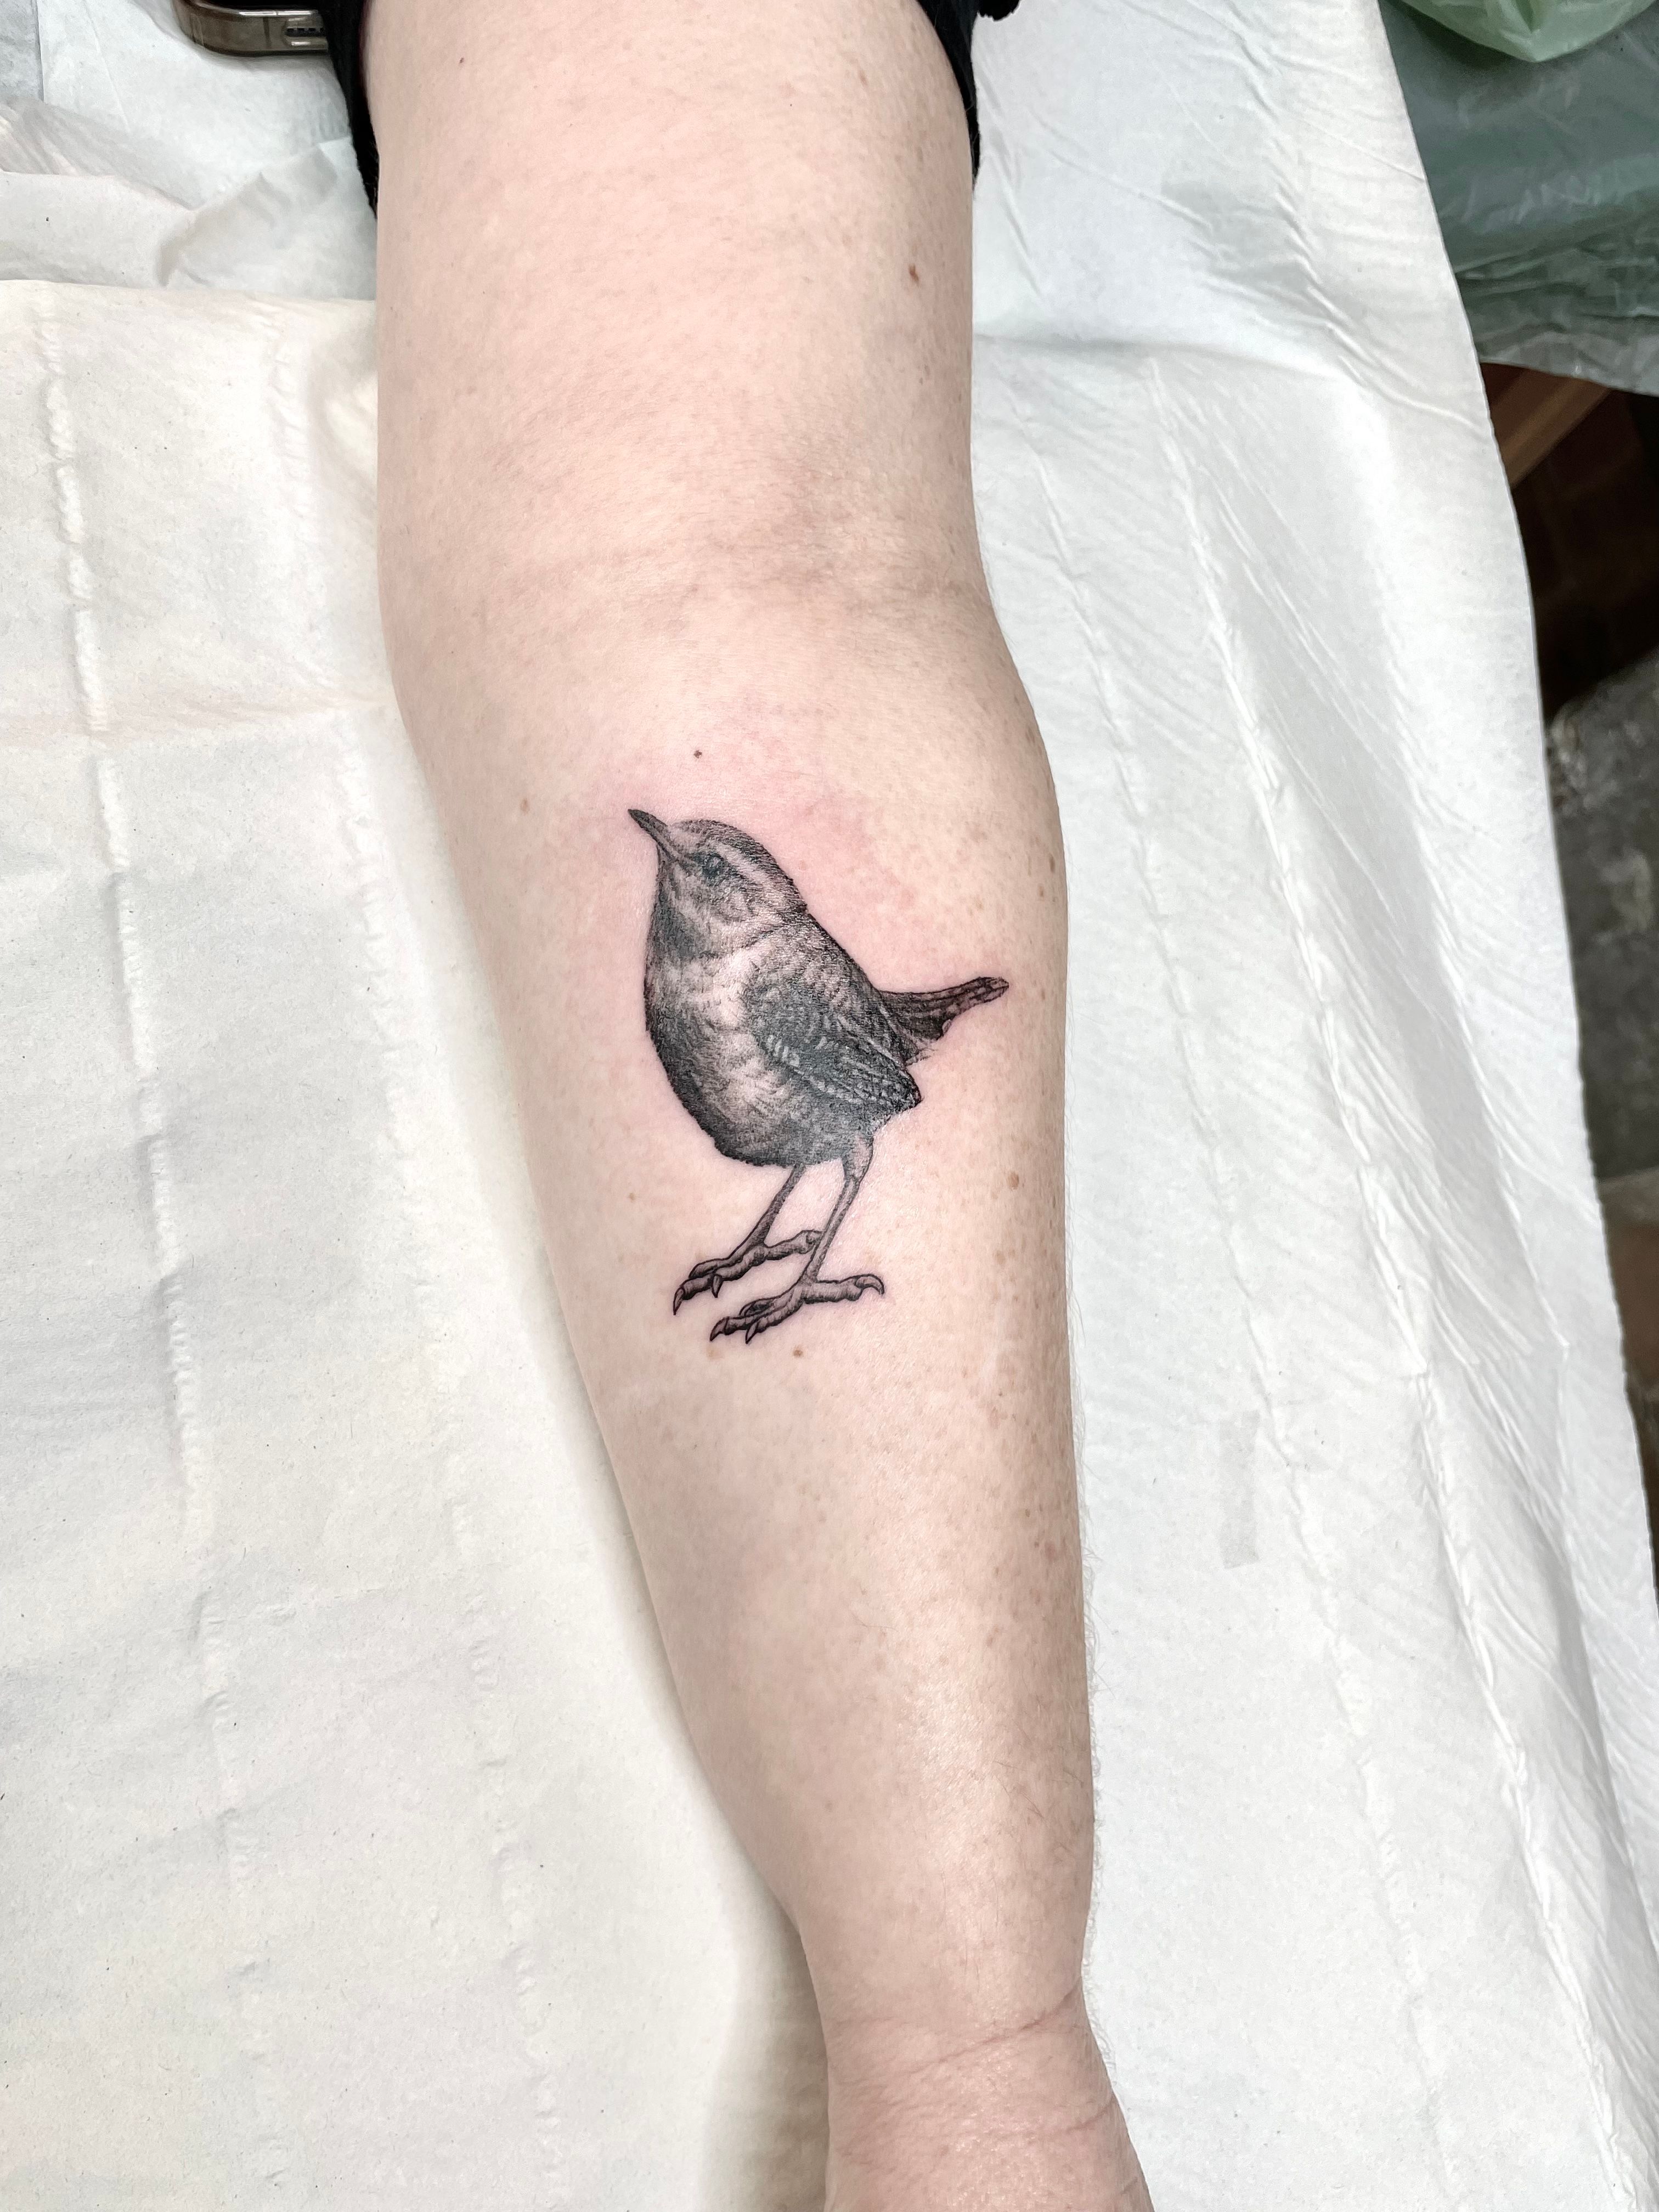 Texas Tattoos  Repost aalonzi from goldenagetattoos in Austin Texas   Lil cactus wren sitting on a chula cactus for Charity Thank you  friend  cactuswrentattoo birdtattoo colortattoo chulacactustattoo  cactustattoo wrentattoo 